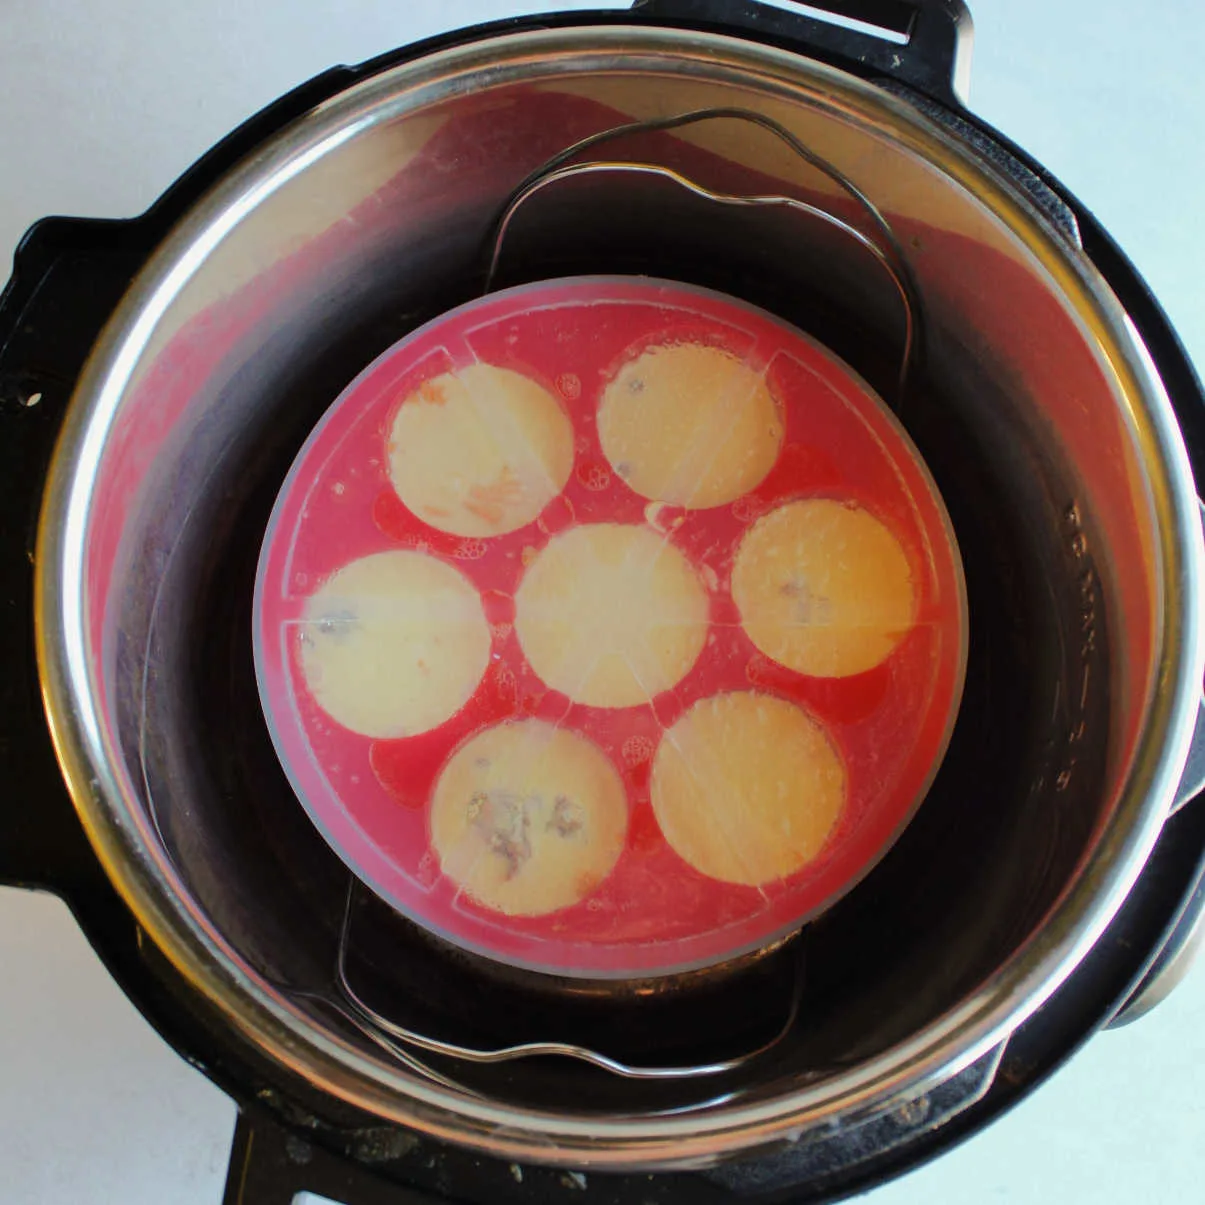 Silicone mold filled with egg mixture with lid on in instant pot ready to cook.